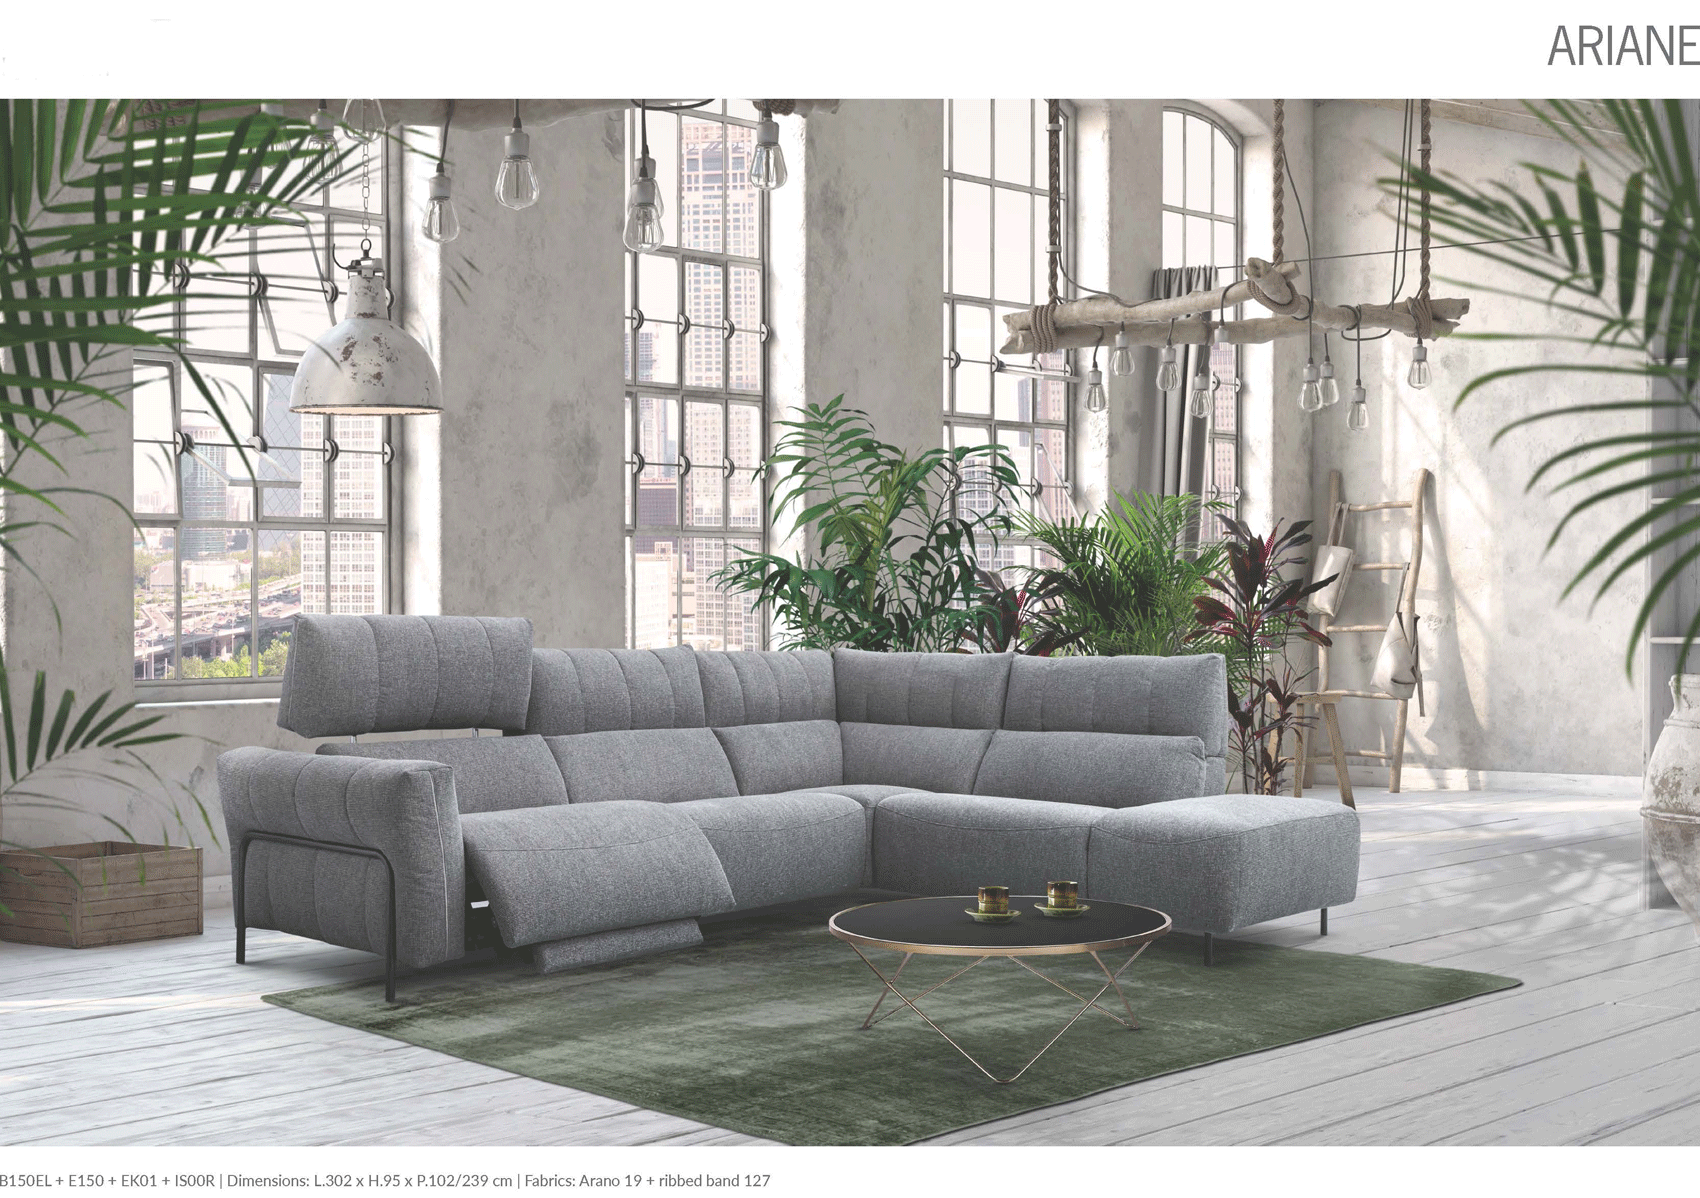 Living Room Furniture Sleepers Sofas Loveseats and Chairs Ariane Sectional